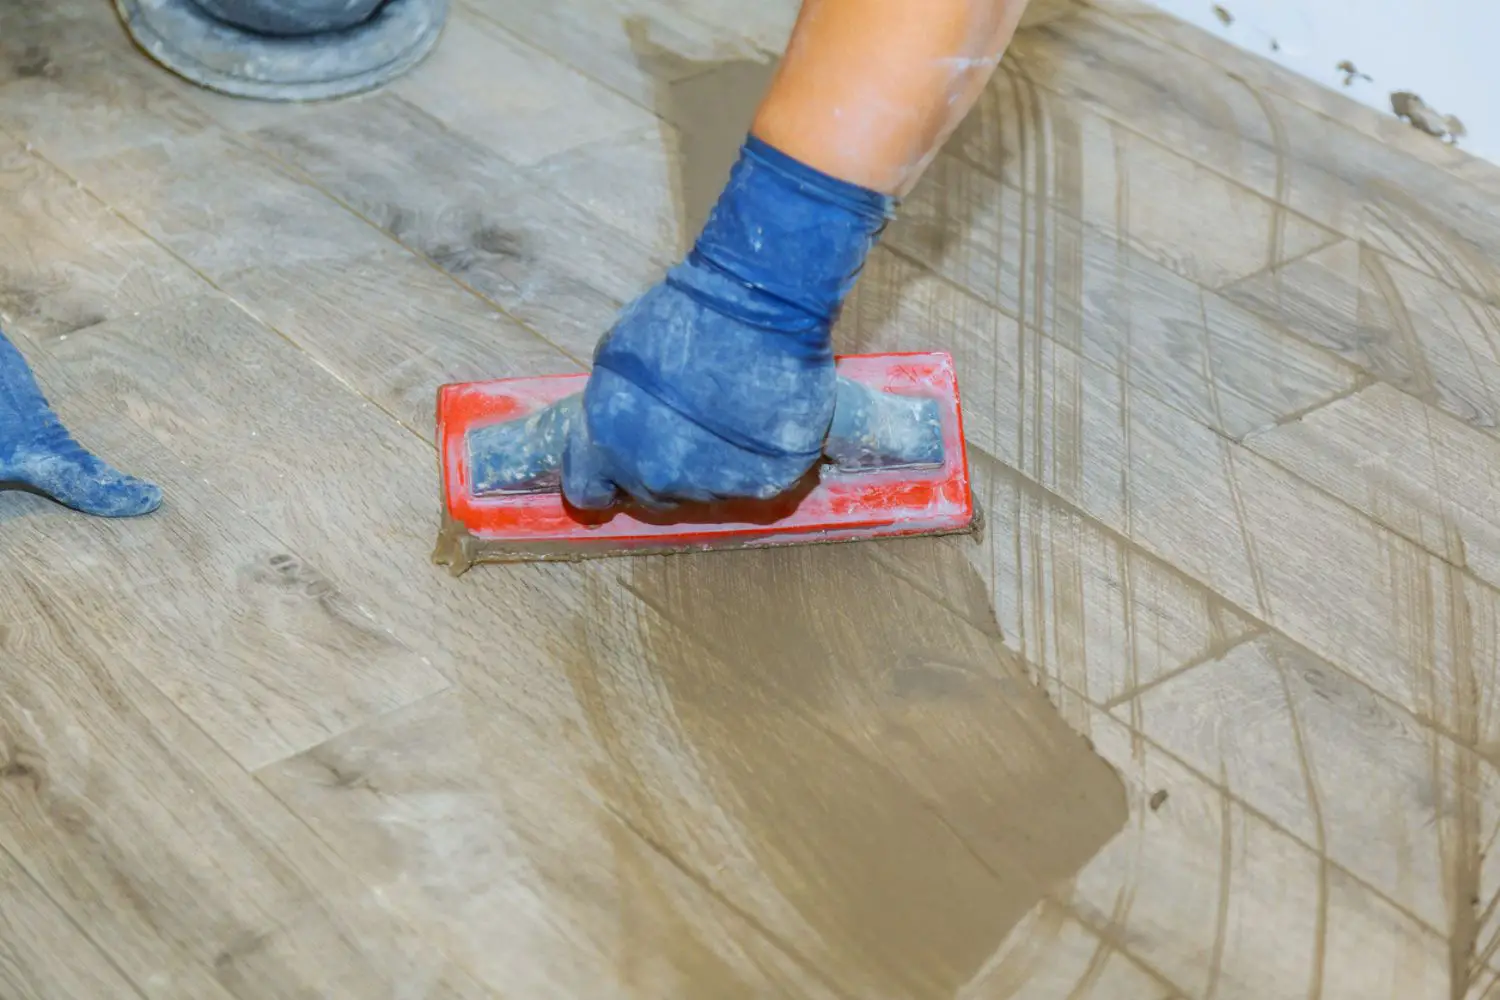 How Long Does Grout Sealer Take to Dry?